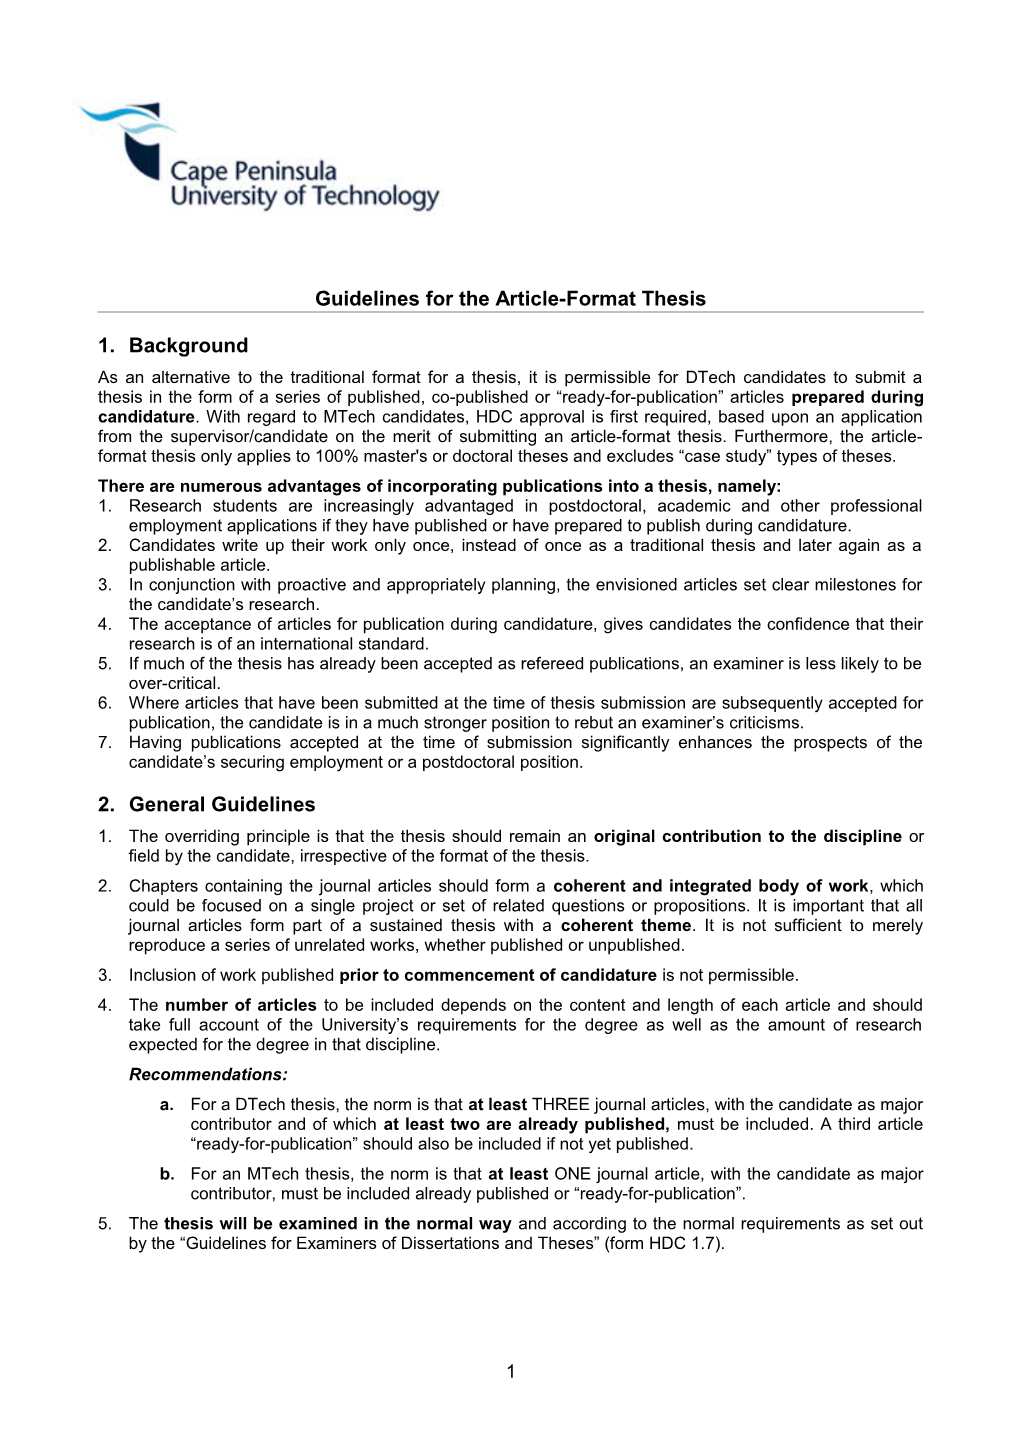 Guidelines for the Article-Format Thesis